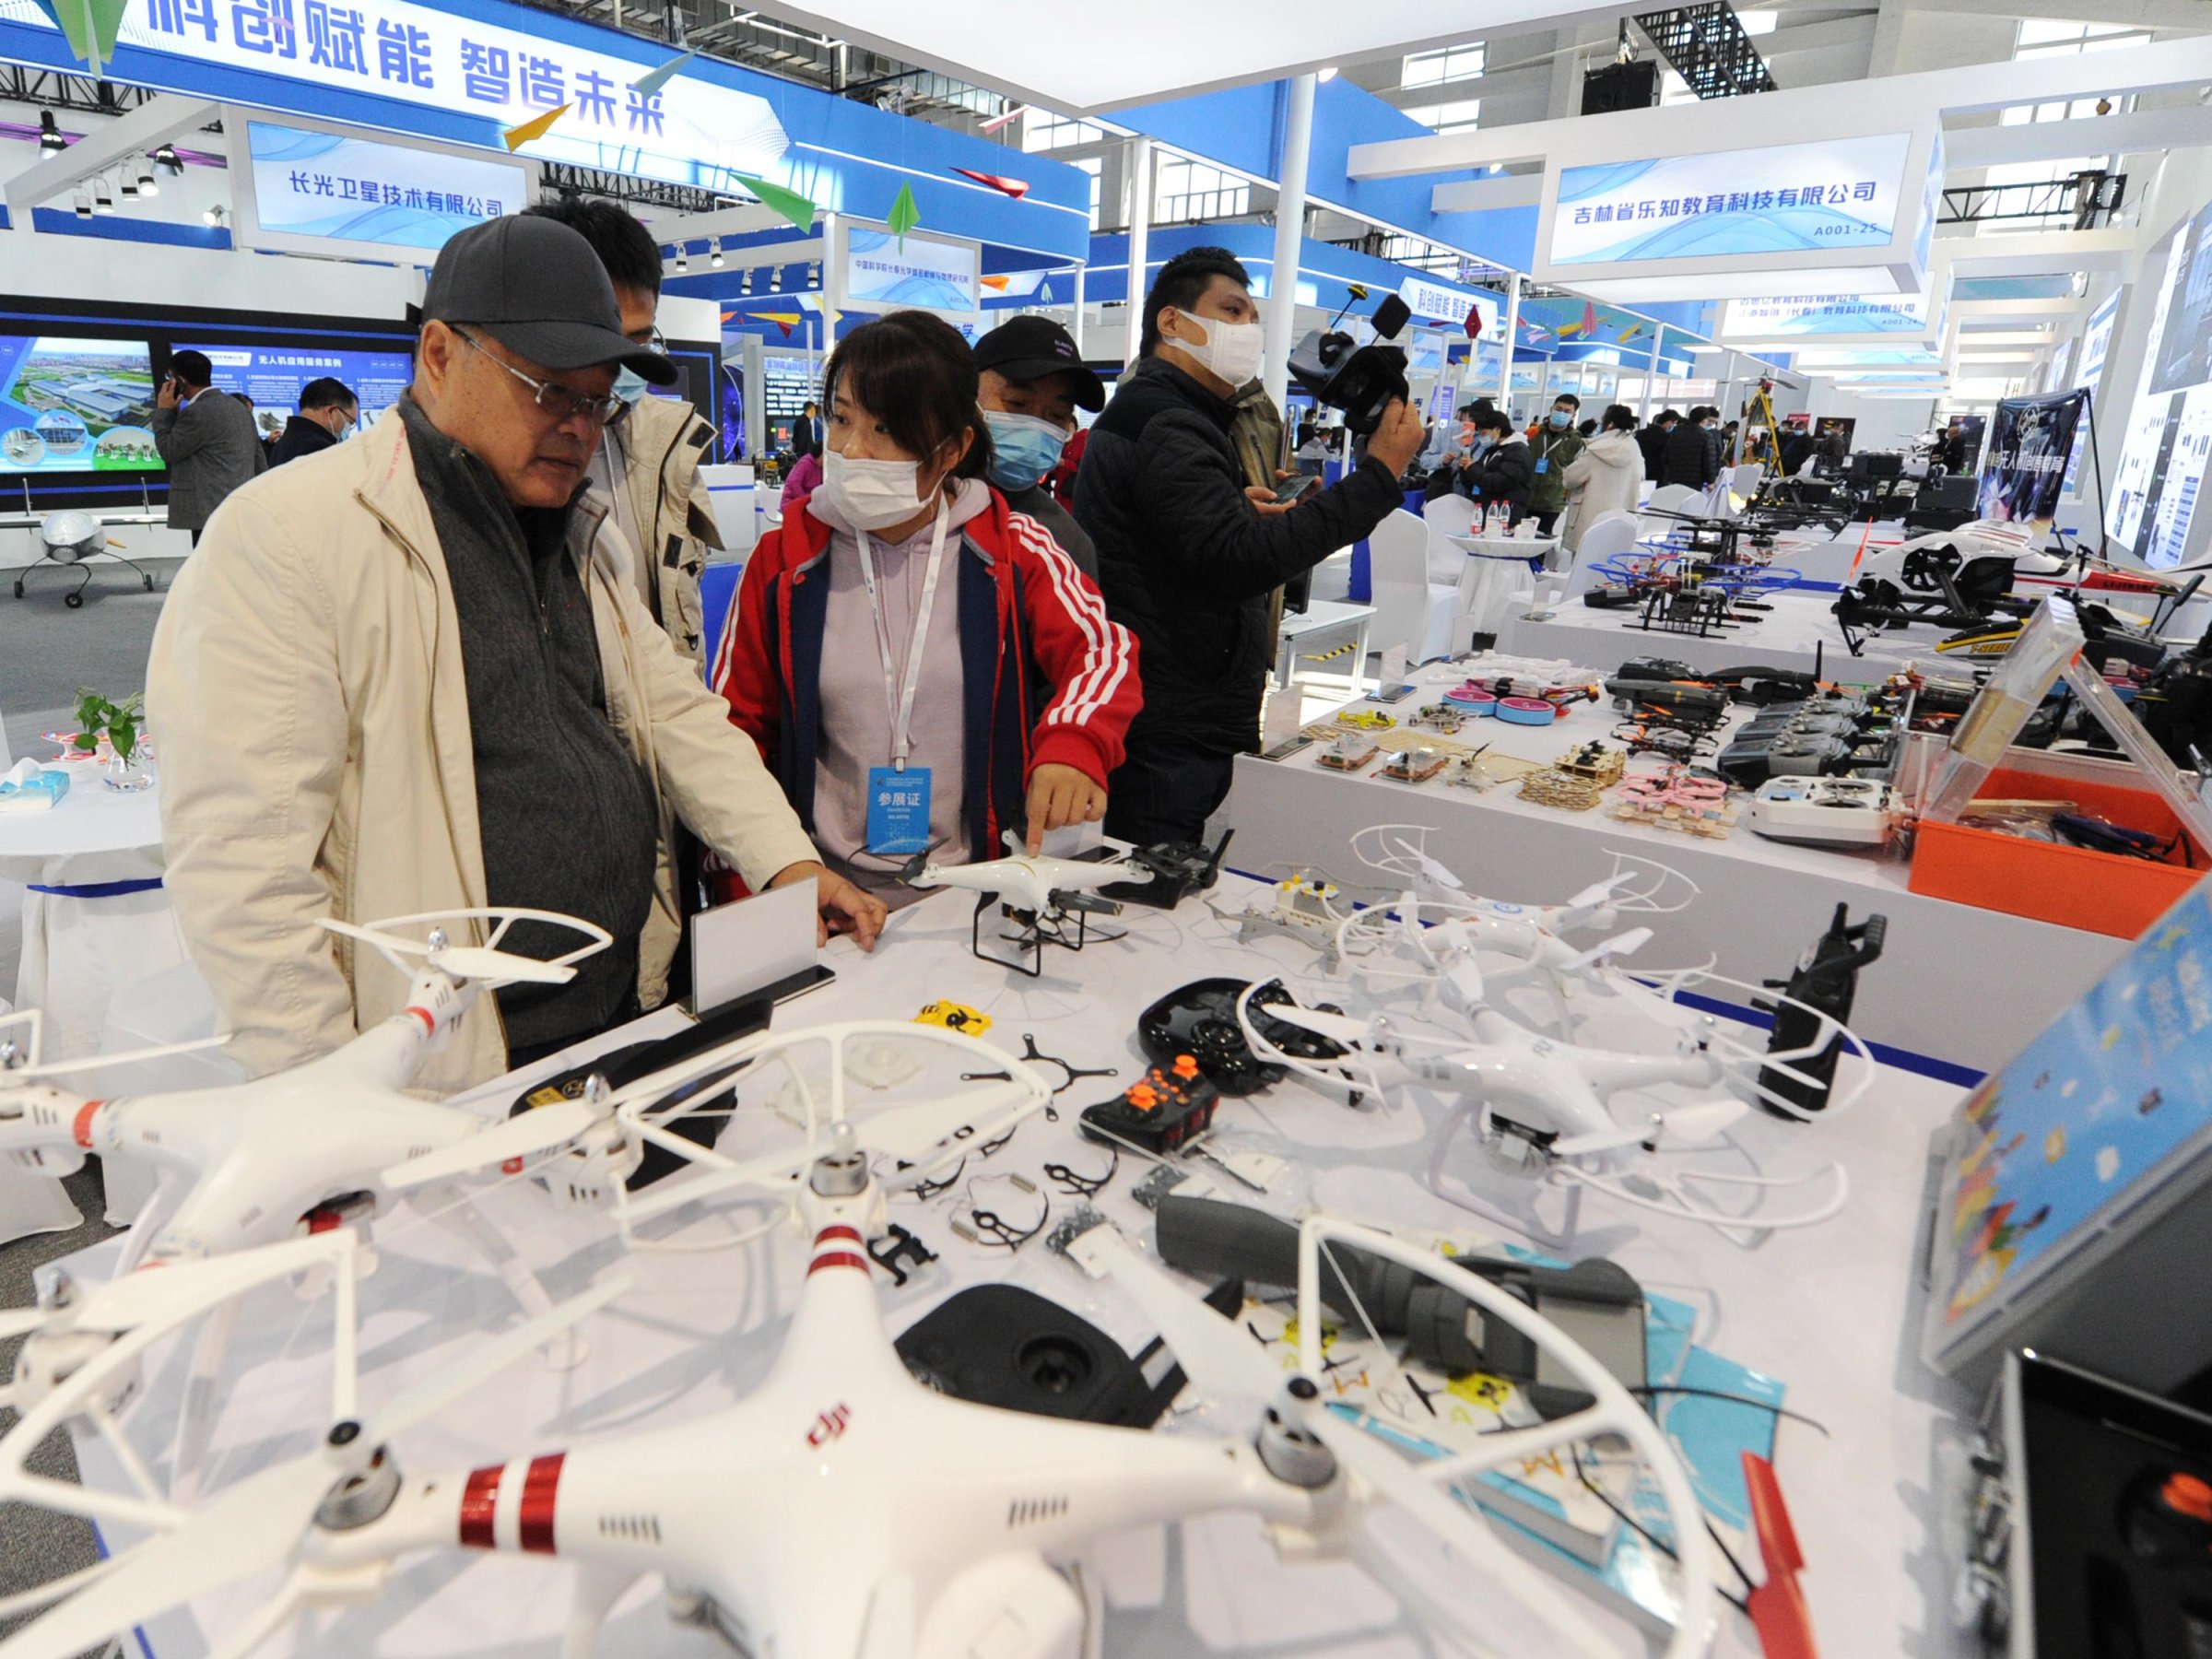 People look at drones at the DJI stand during the 2020 Changchun International UAV Industry Expo at CCIAFF Expo park on October 16, 2020 in Changchun, Jilin Province of China.